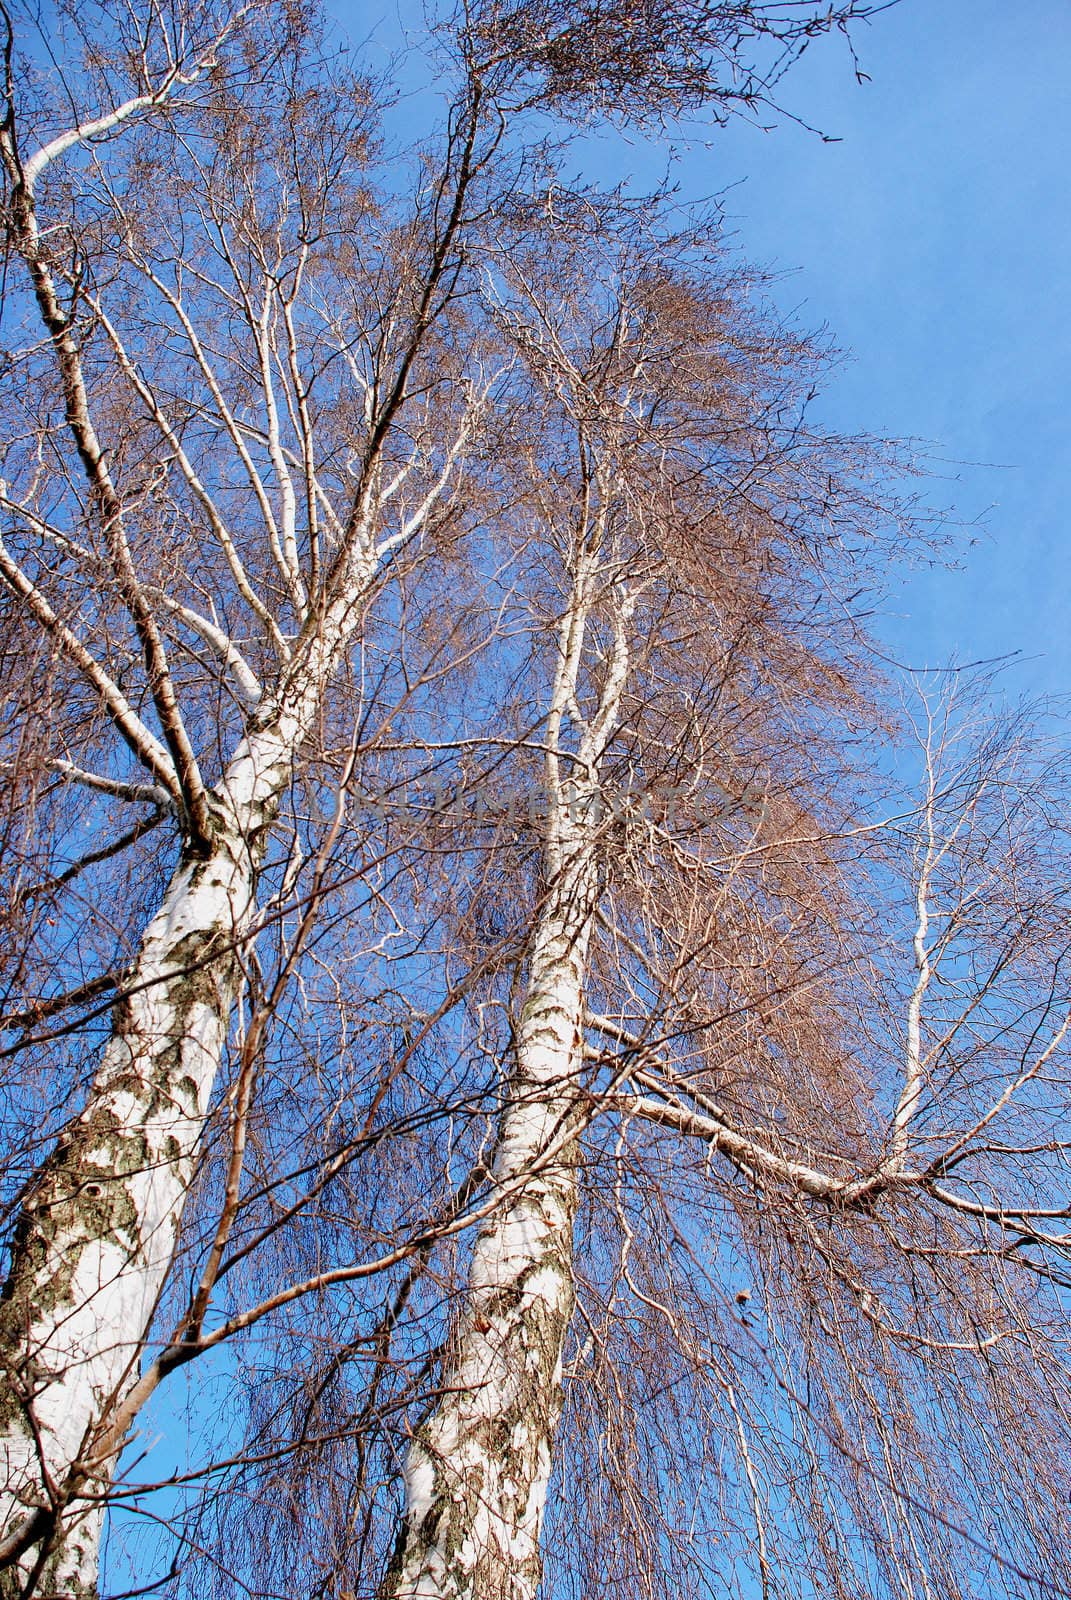 Birches without leaves by sauletas